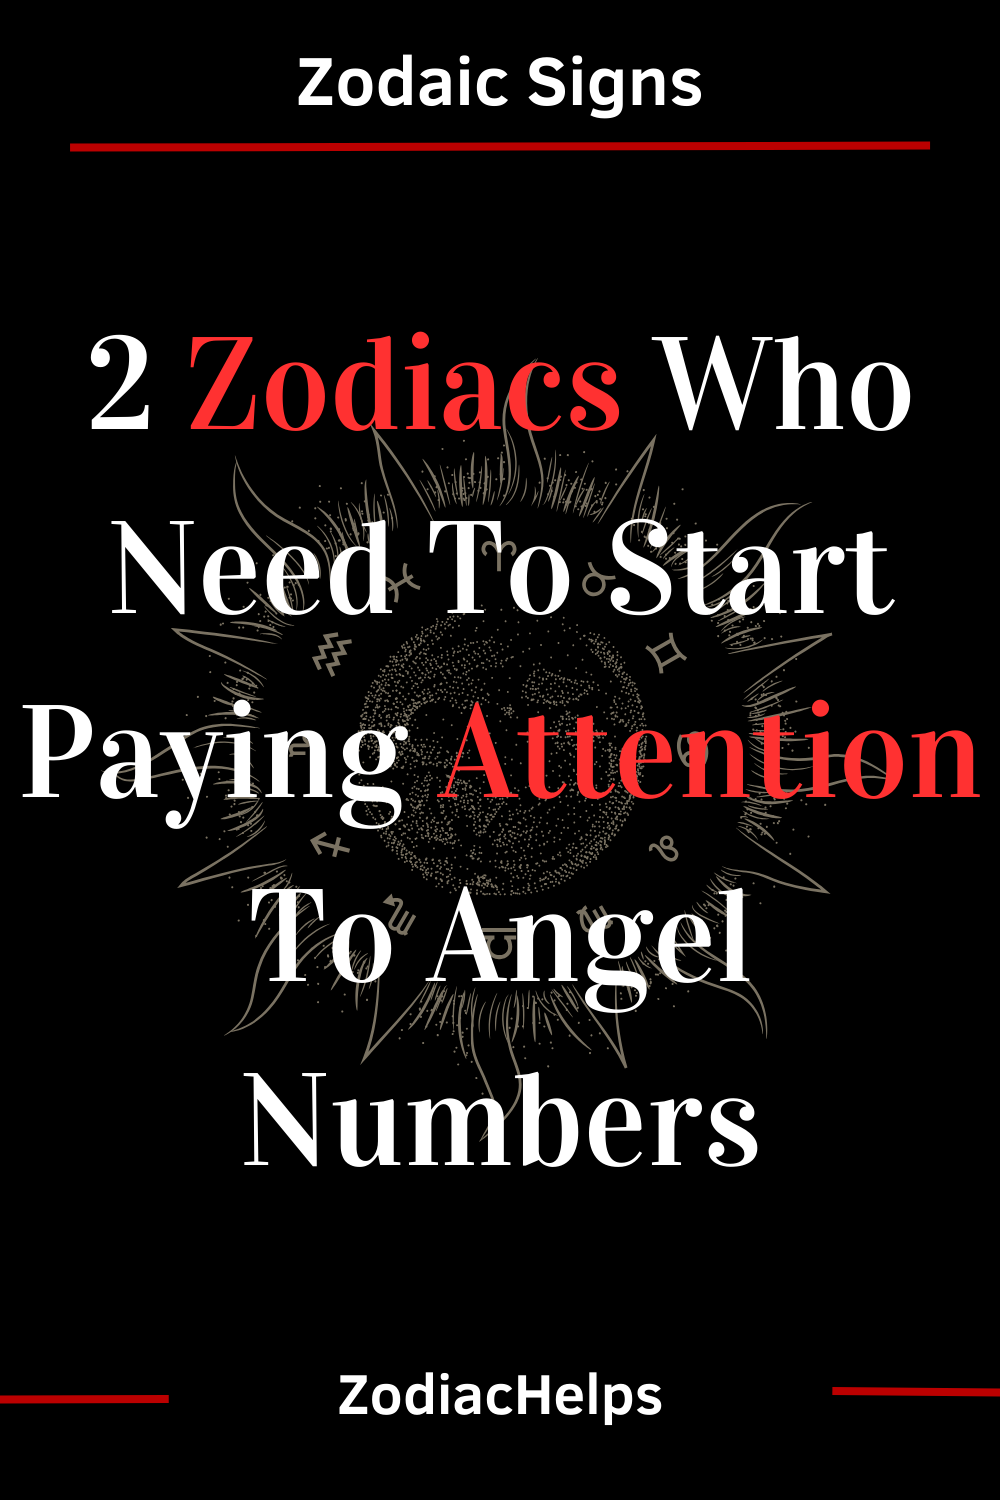 2 Zodiacs Who Need To Start Paying Attention To Angel Numbers